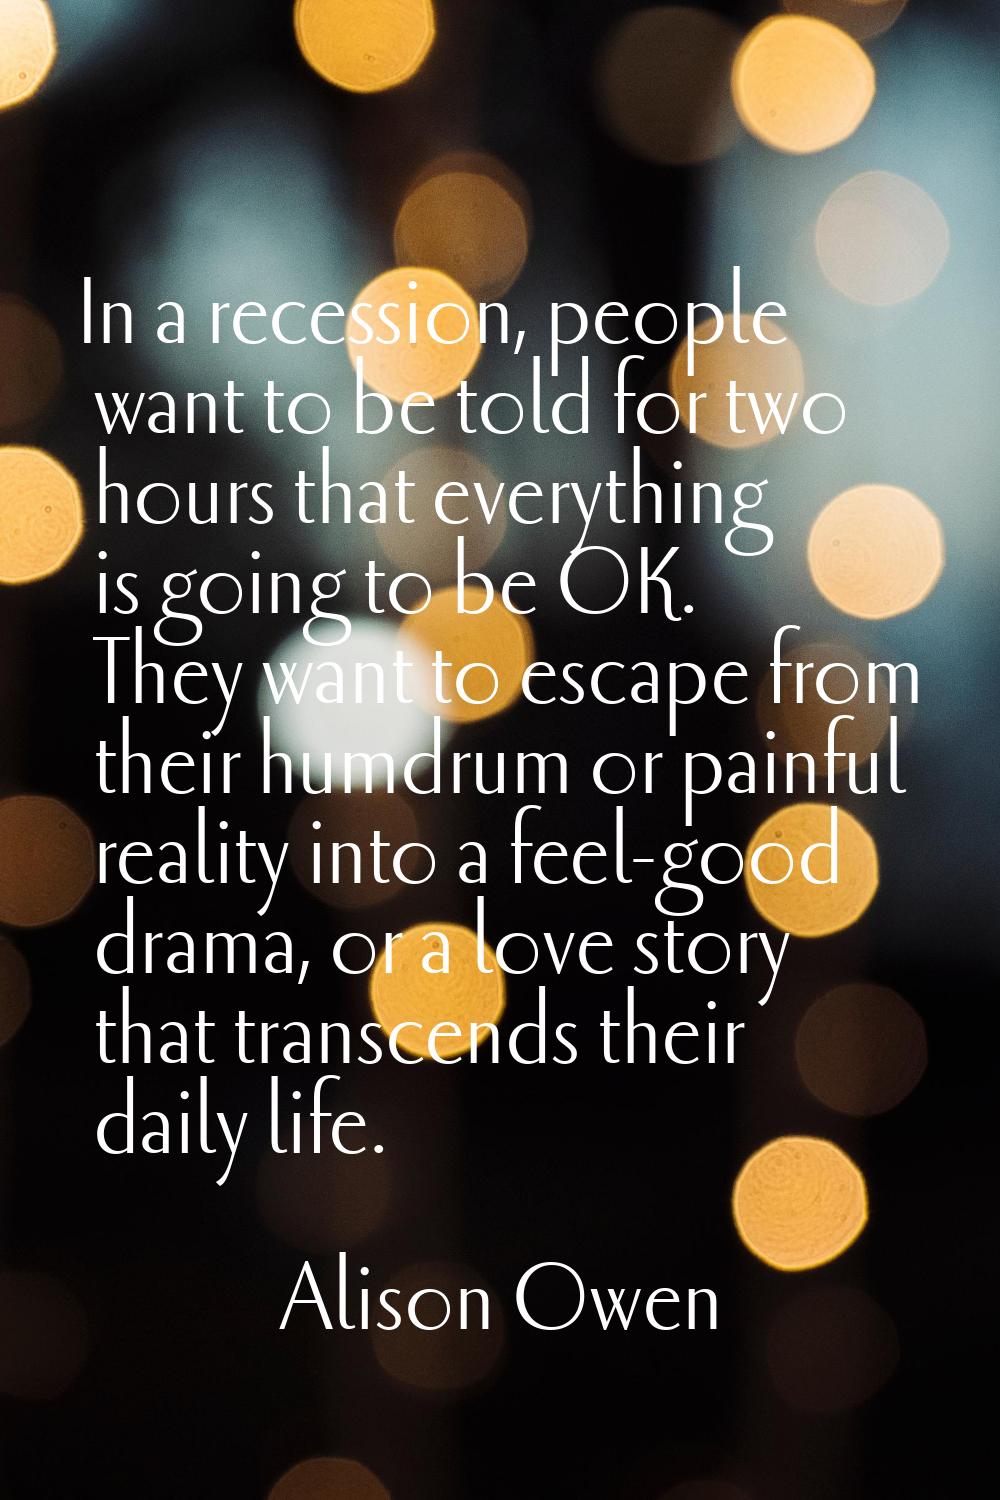 In a recession, people want to be told for two hours that everything is going to be OK. They want t